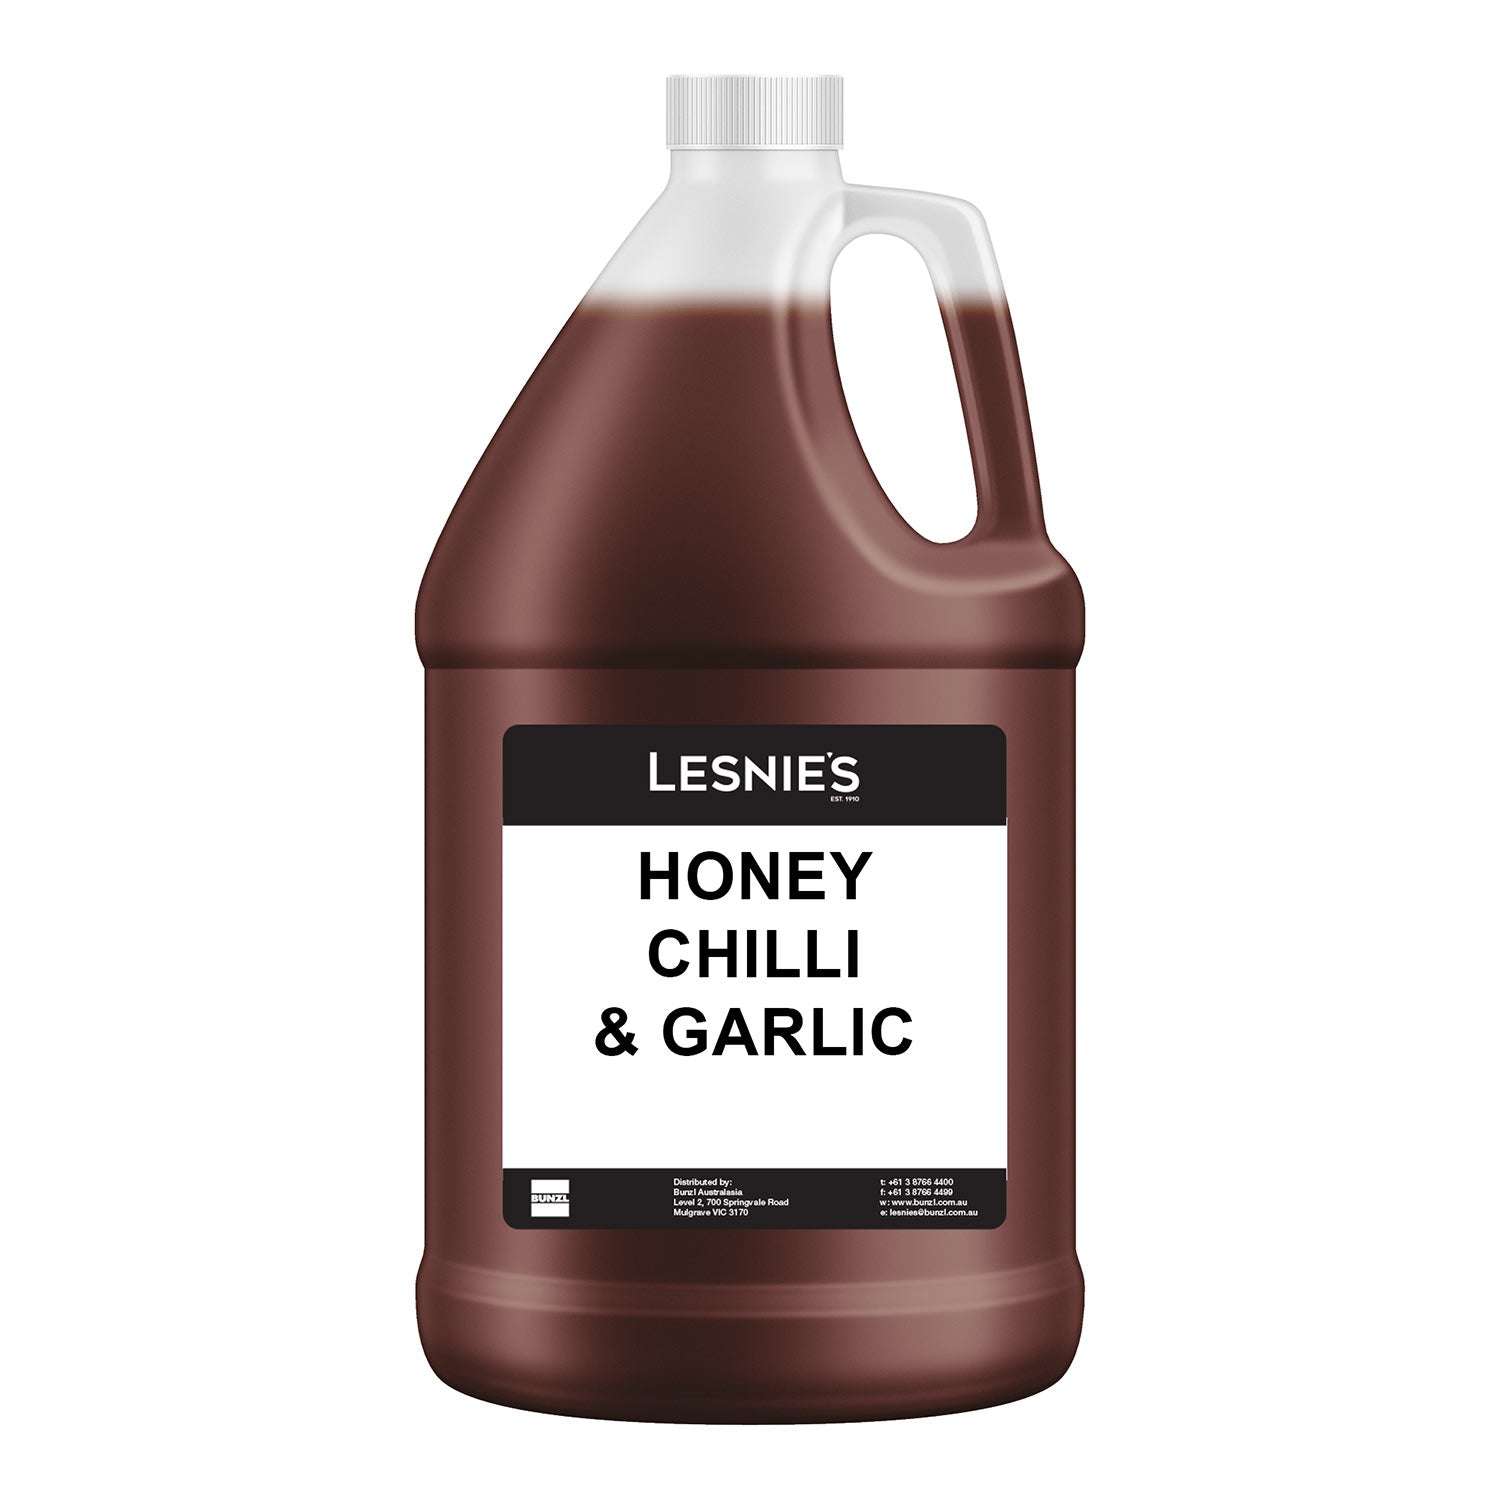 Lesnies Marinade Les Honey Chilli Garlic Gluten Free 4L Cooking Ingredients And Sauces  